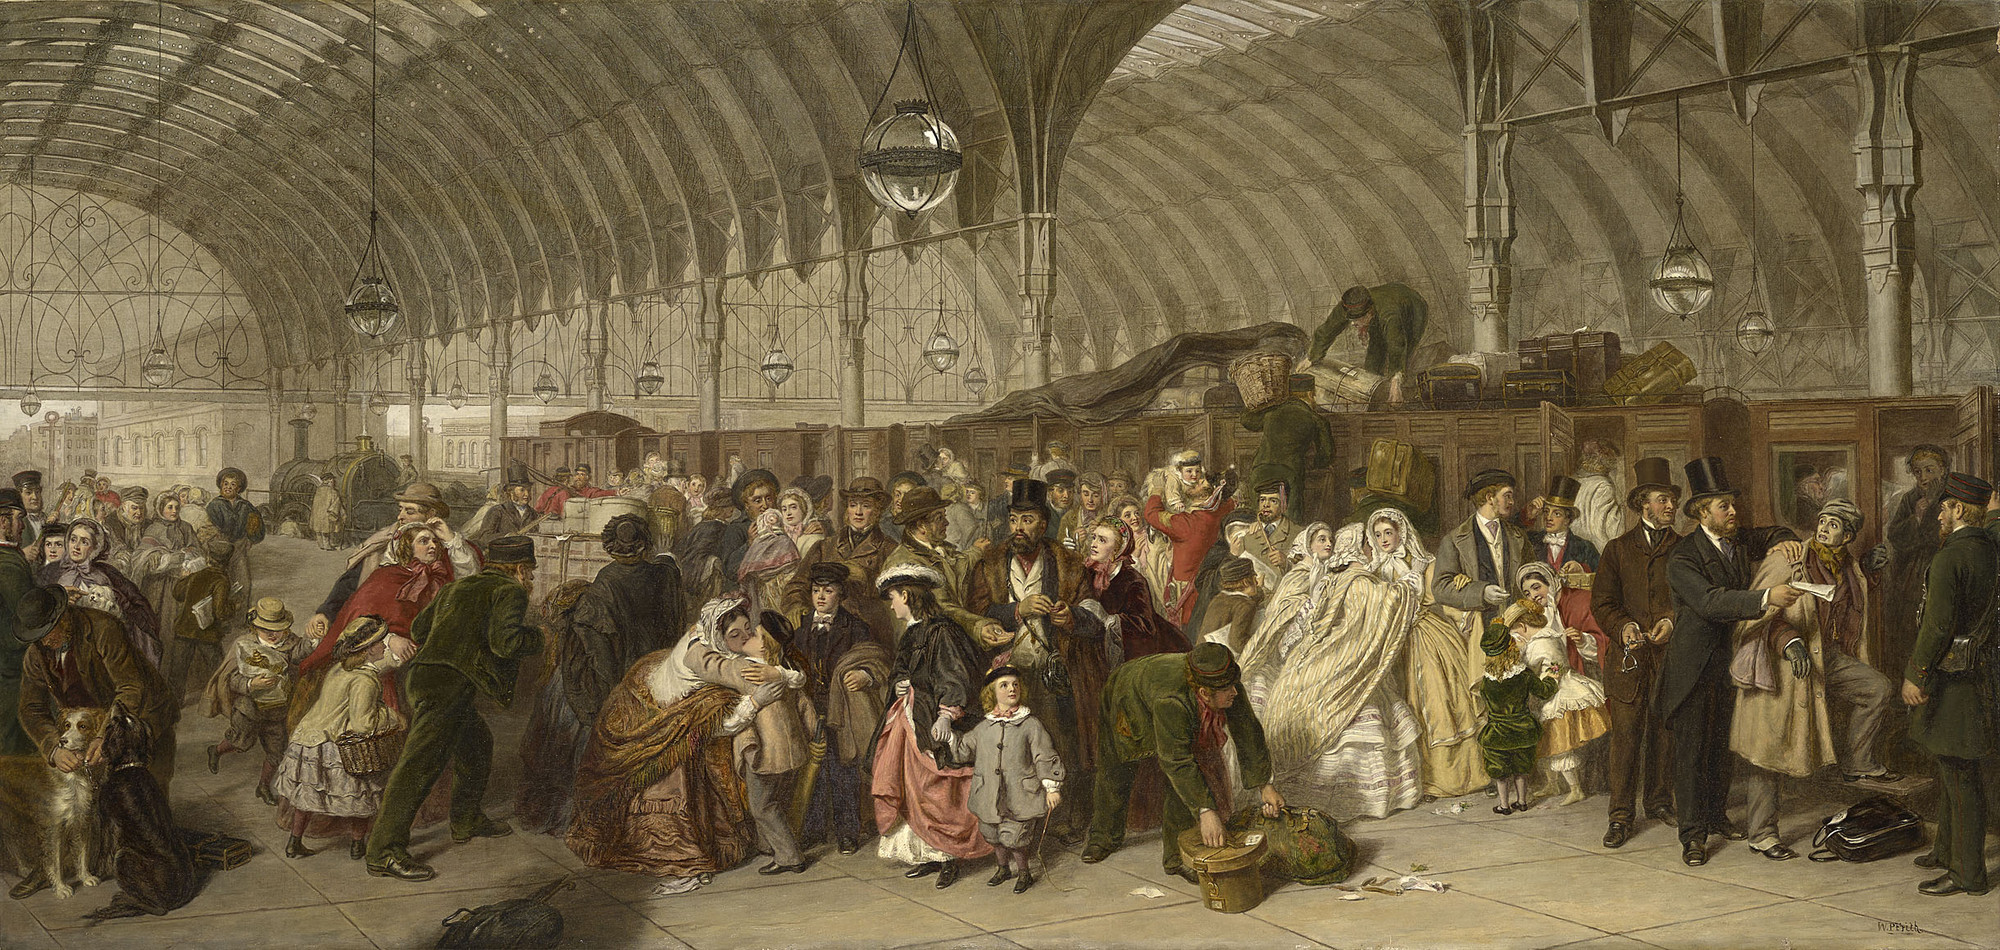 William Powell Frith, The Railway Station, c.1862-1909, oil on canvas, 54.1 x 114.0 cm